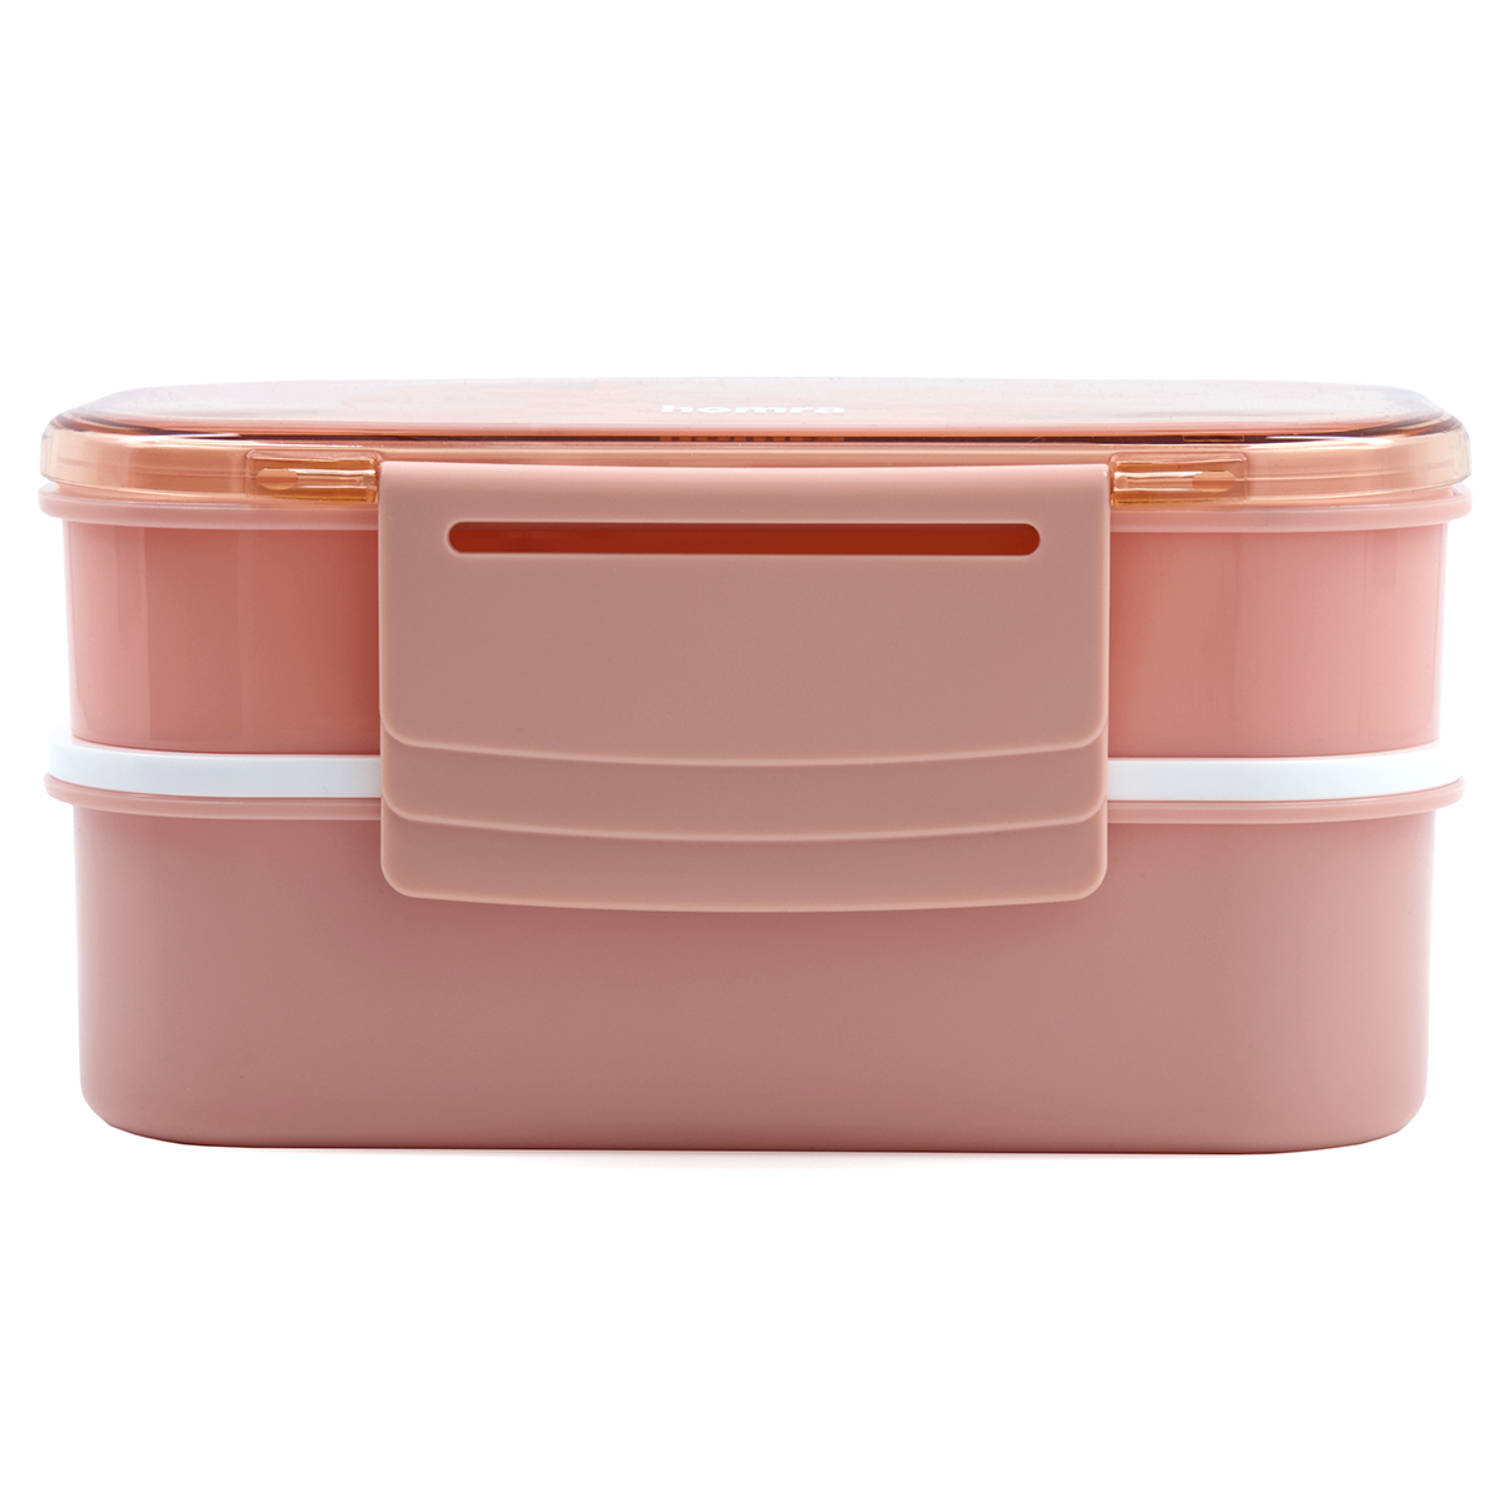 Homra Lunchbox Staqs Pink